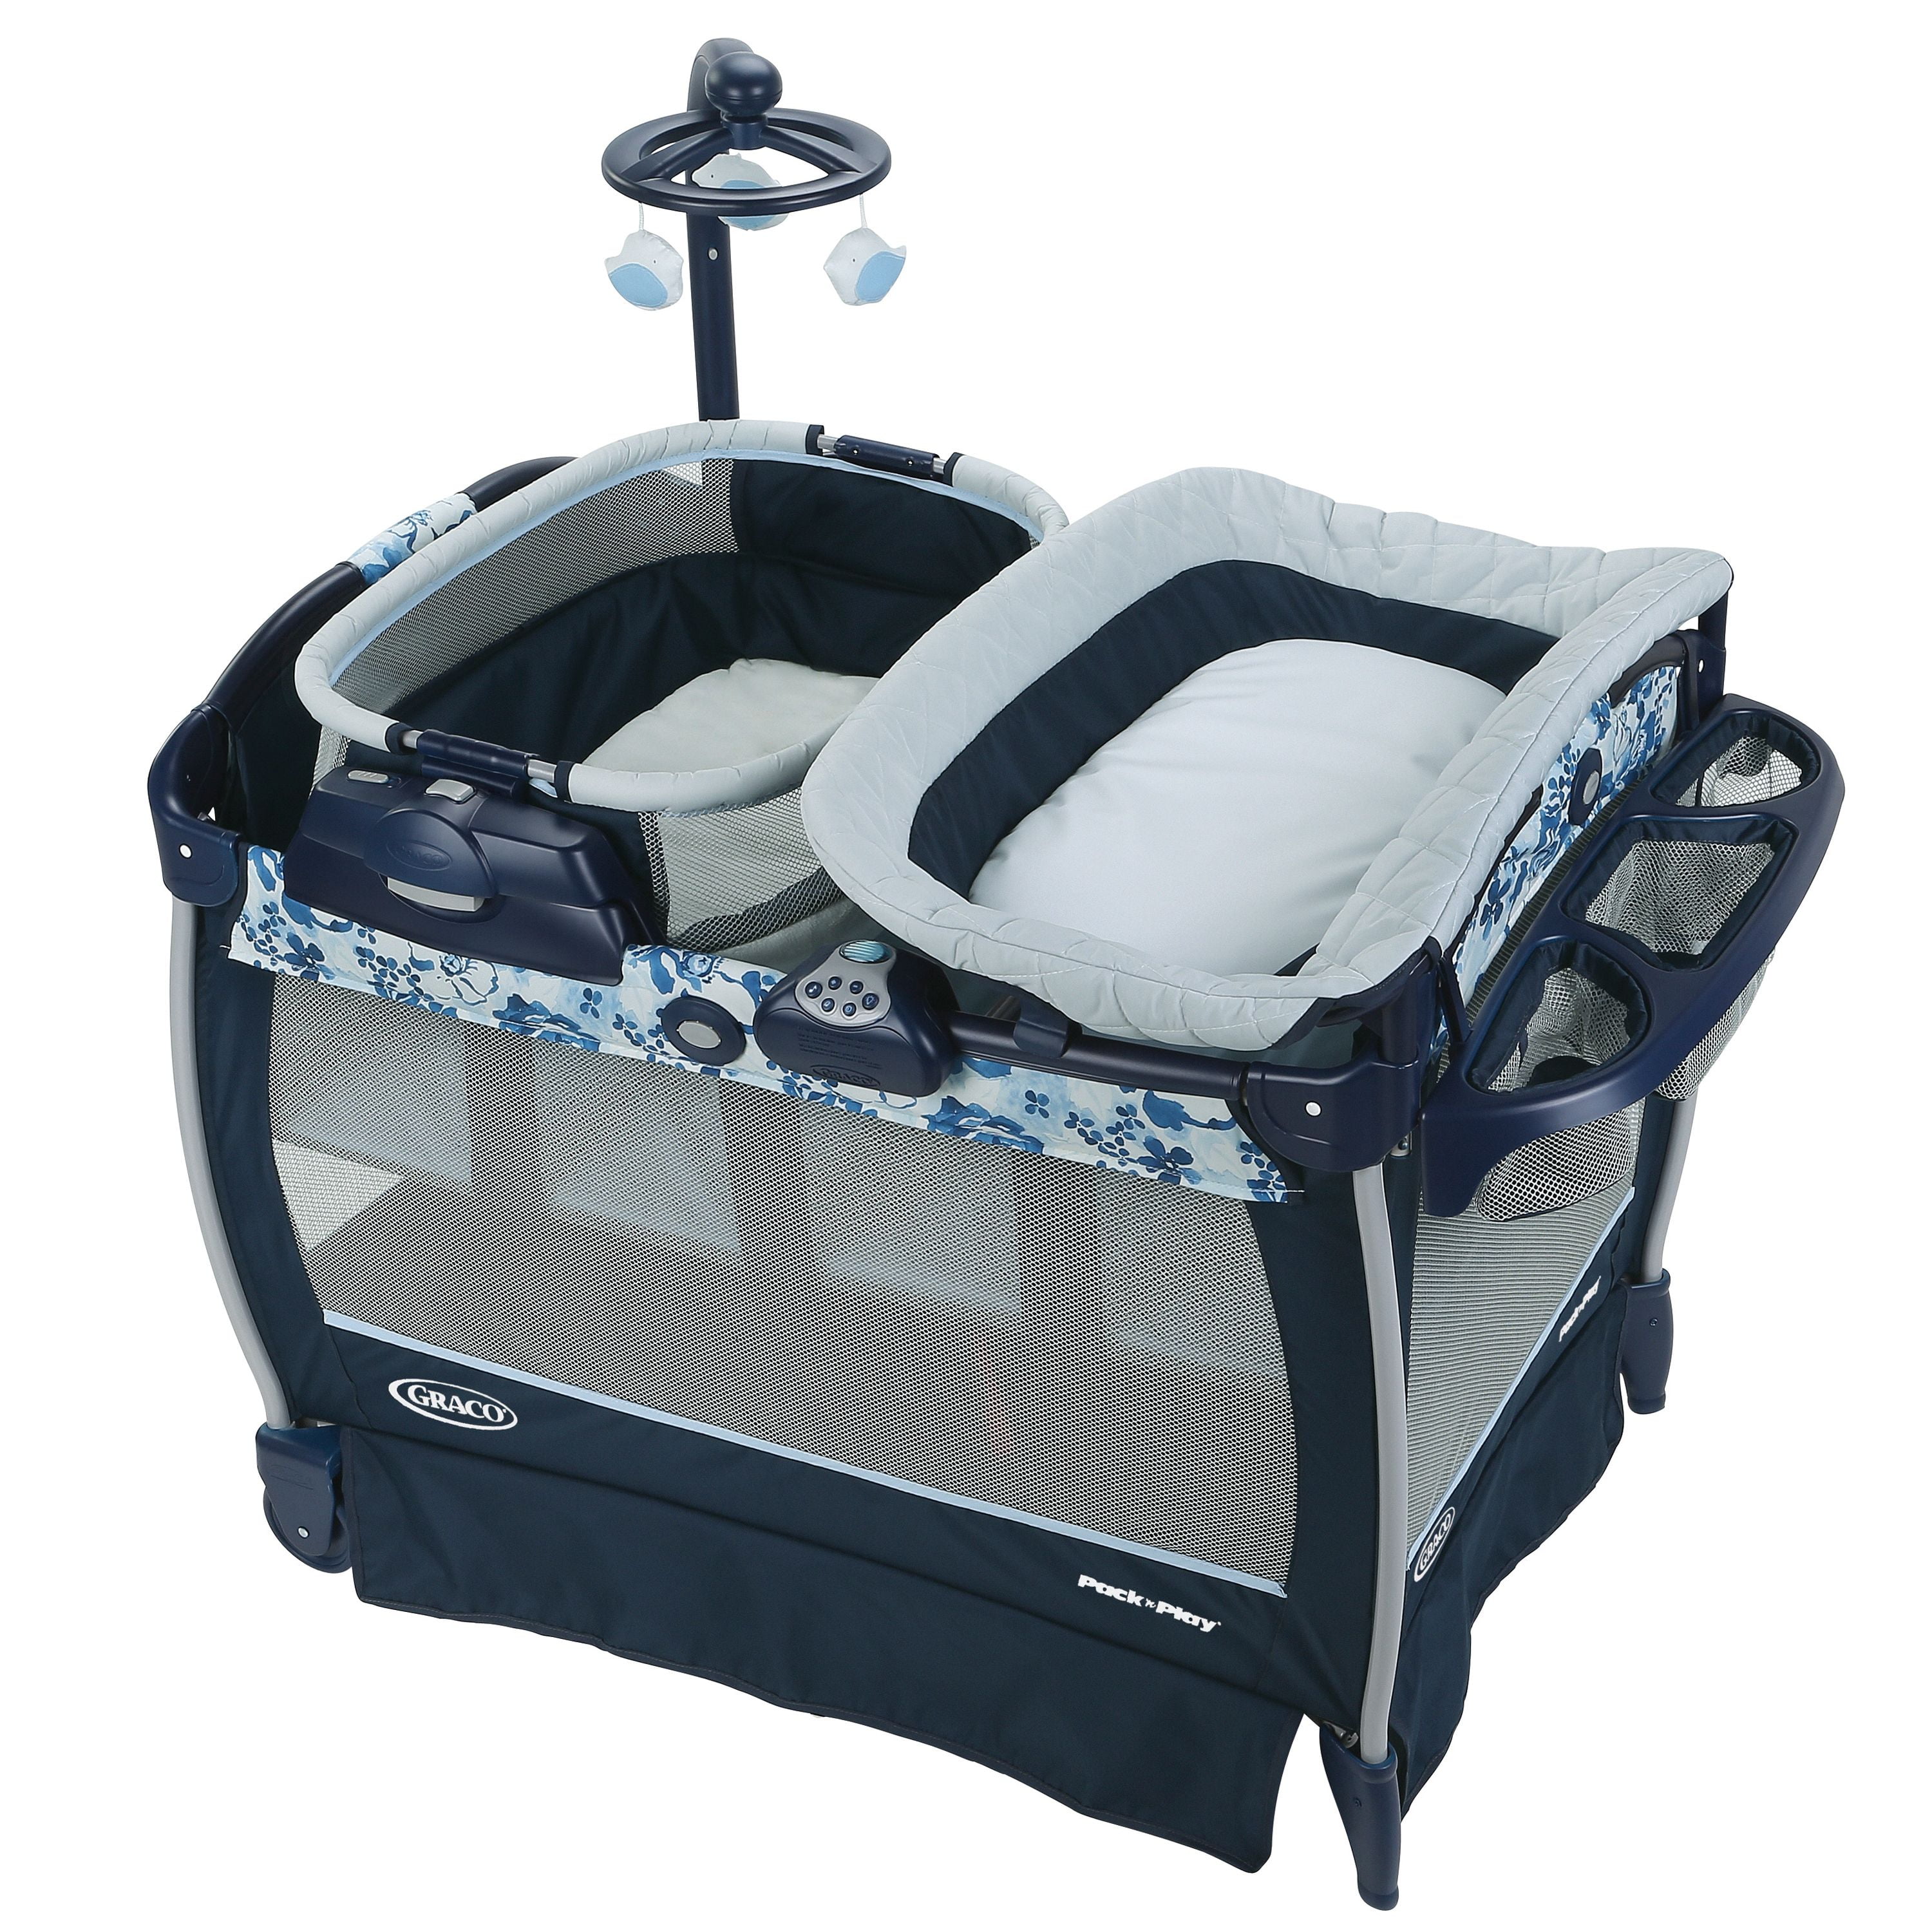 walmart pack and play bassinet